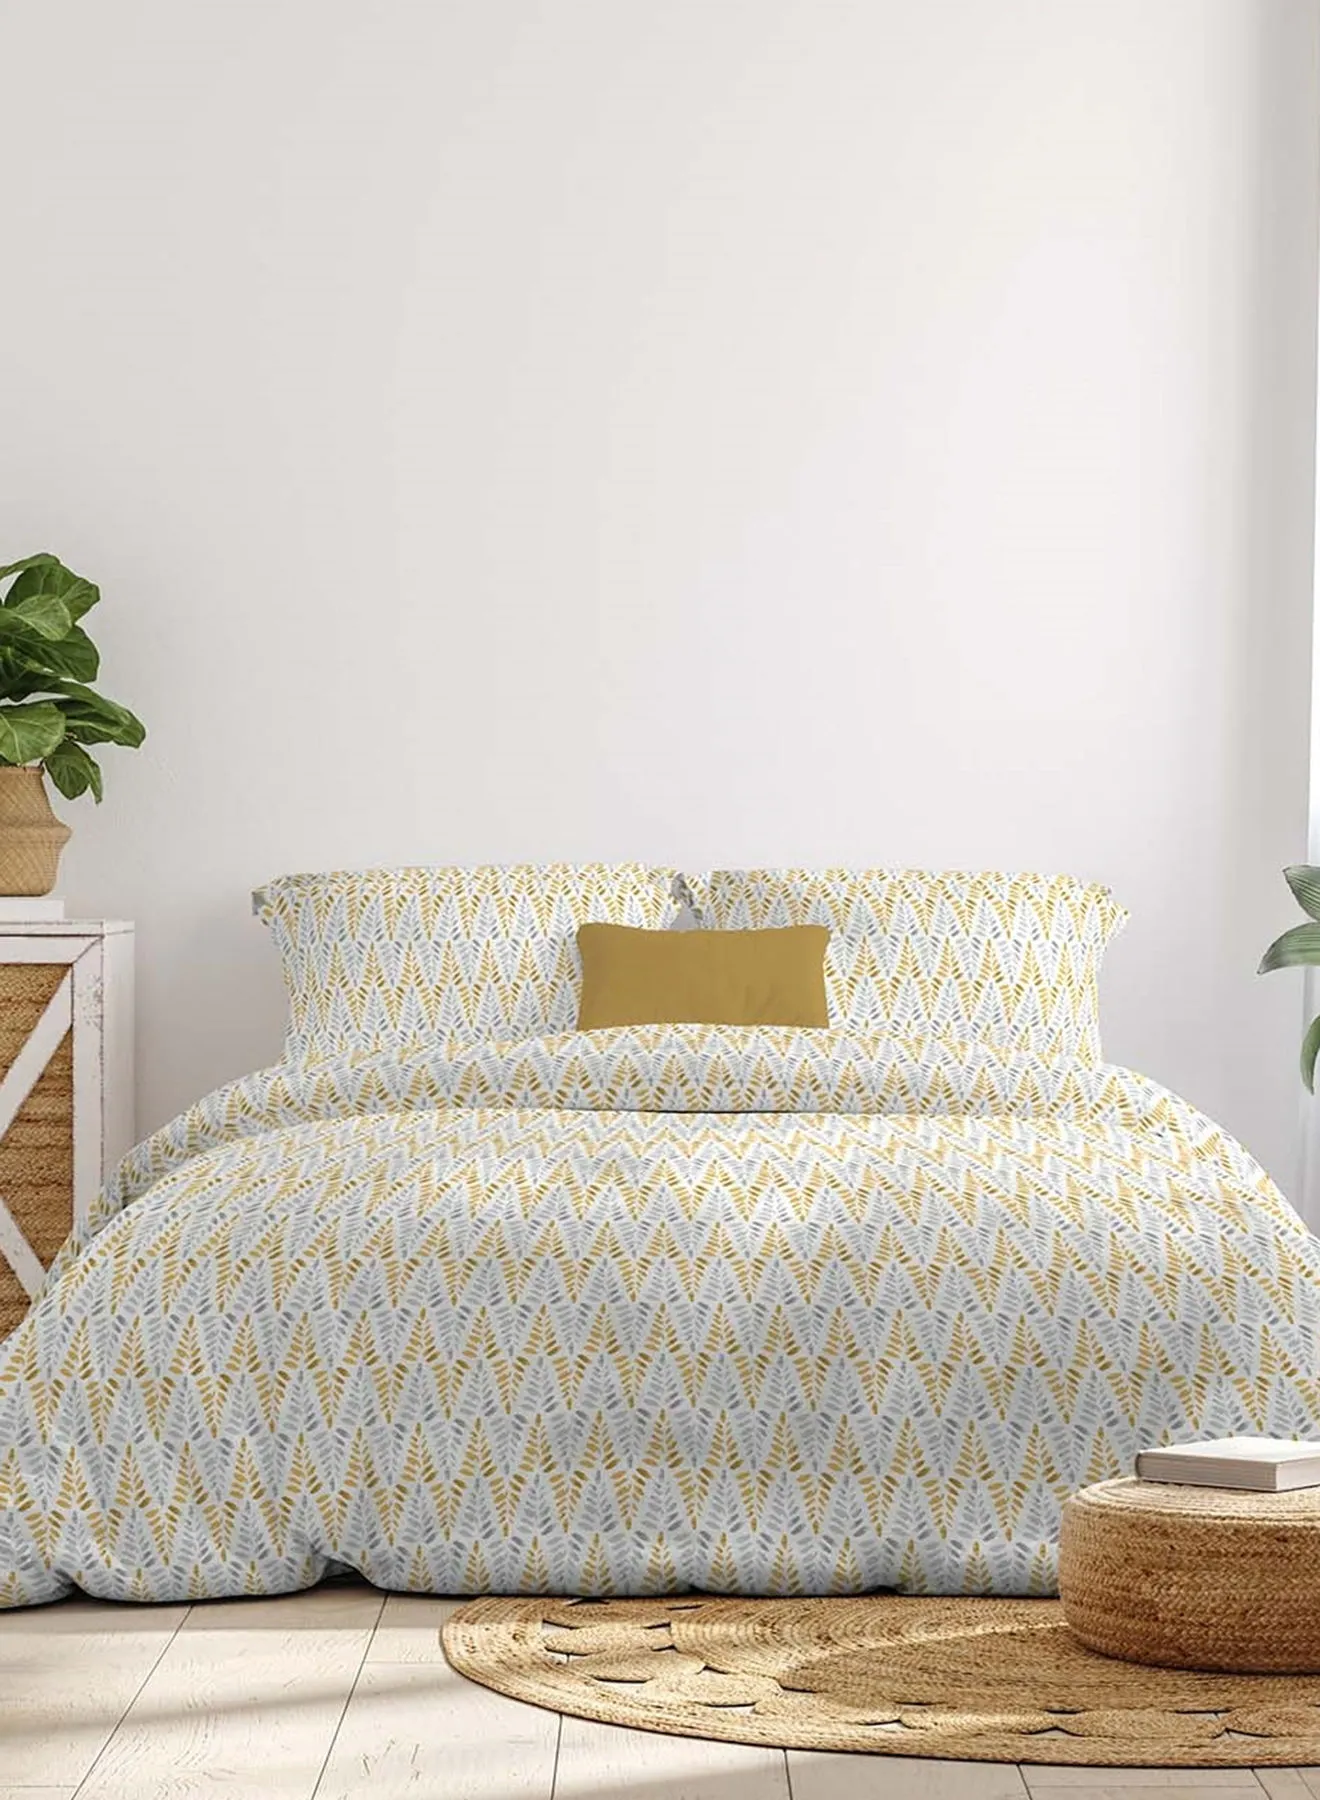 Amal Comforter Set King Size All Season Everyday Use Bedding Set 100% Cotton 3 Pieces 1 Comforter 2 Pillow Covers  Gold